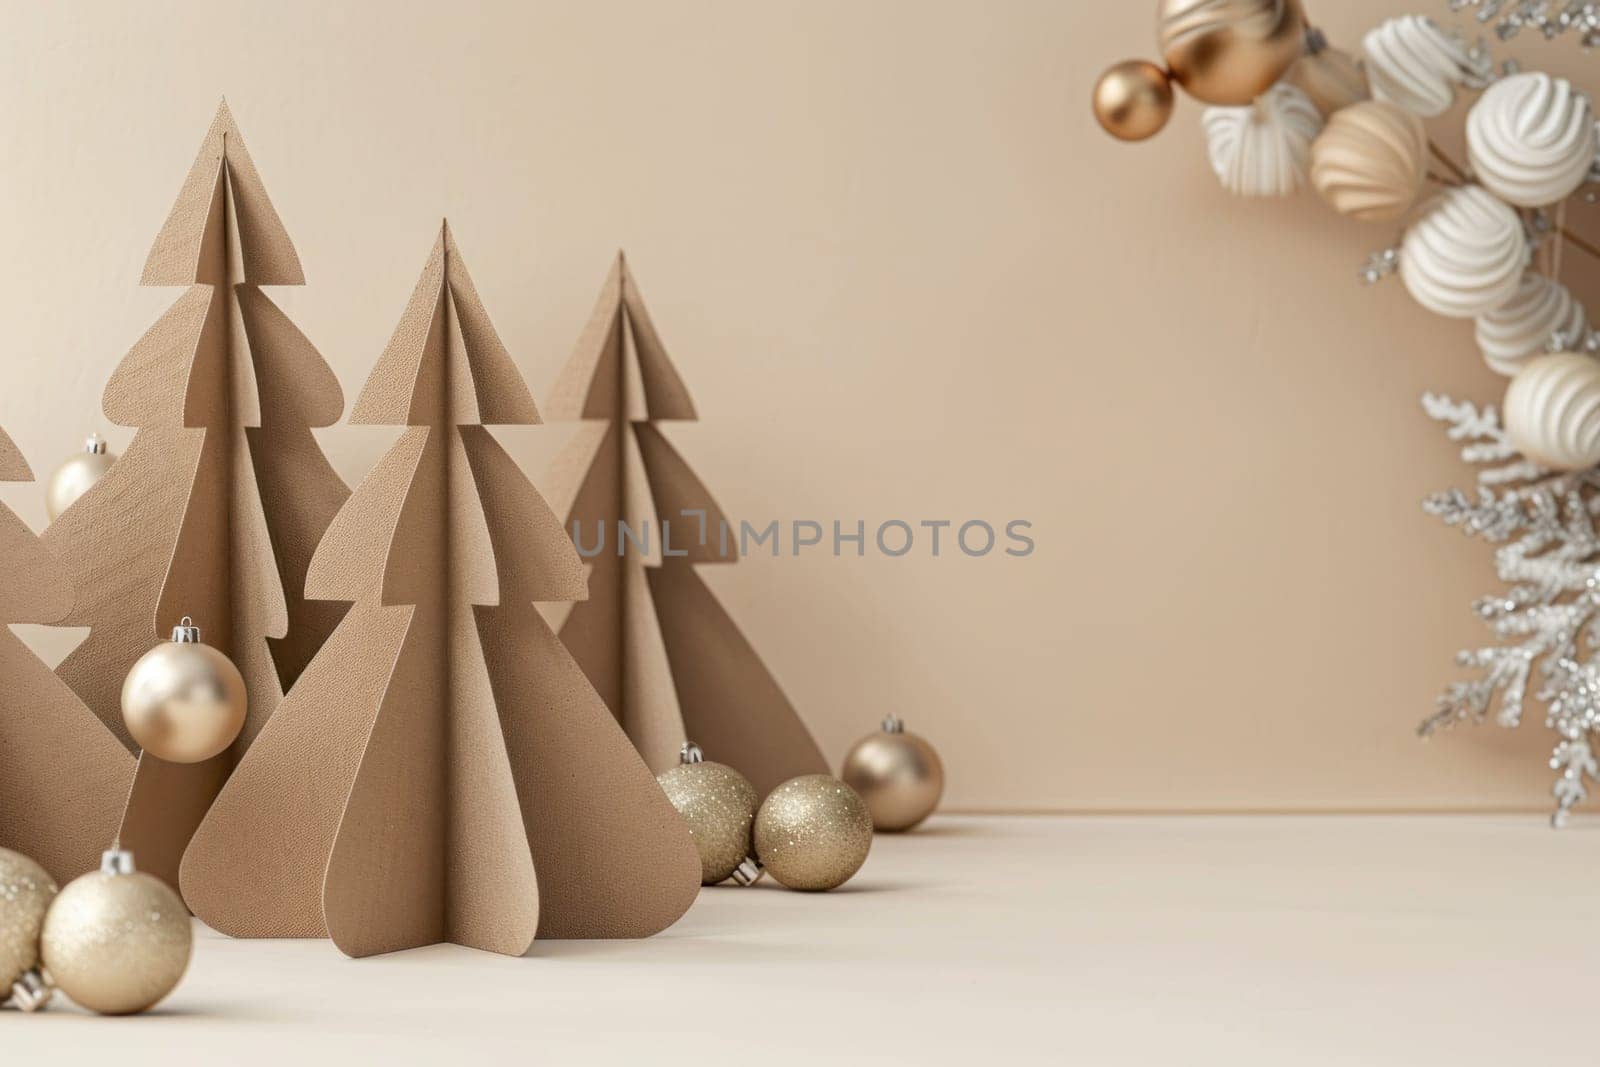 Cardboard christmas trees on beige background for holiday season decoration concept in 3d rendering